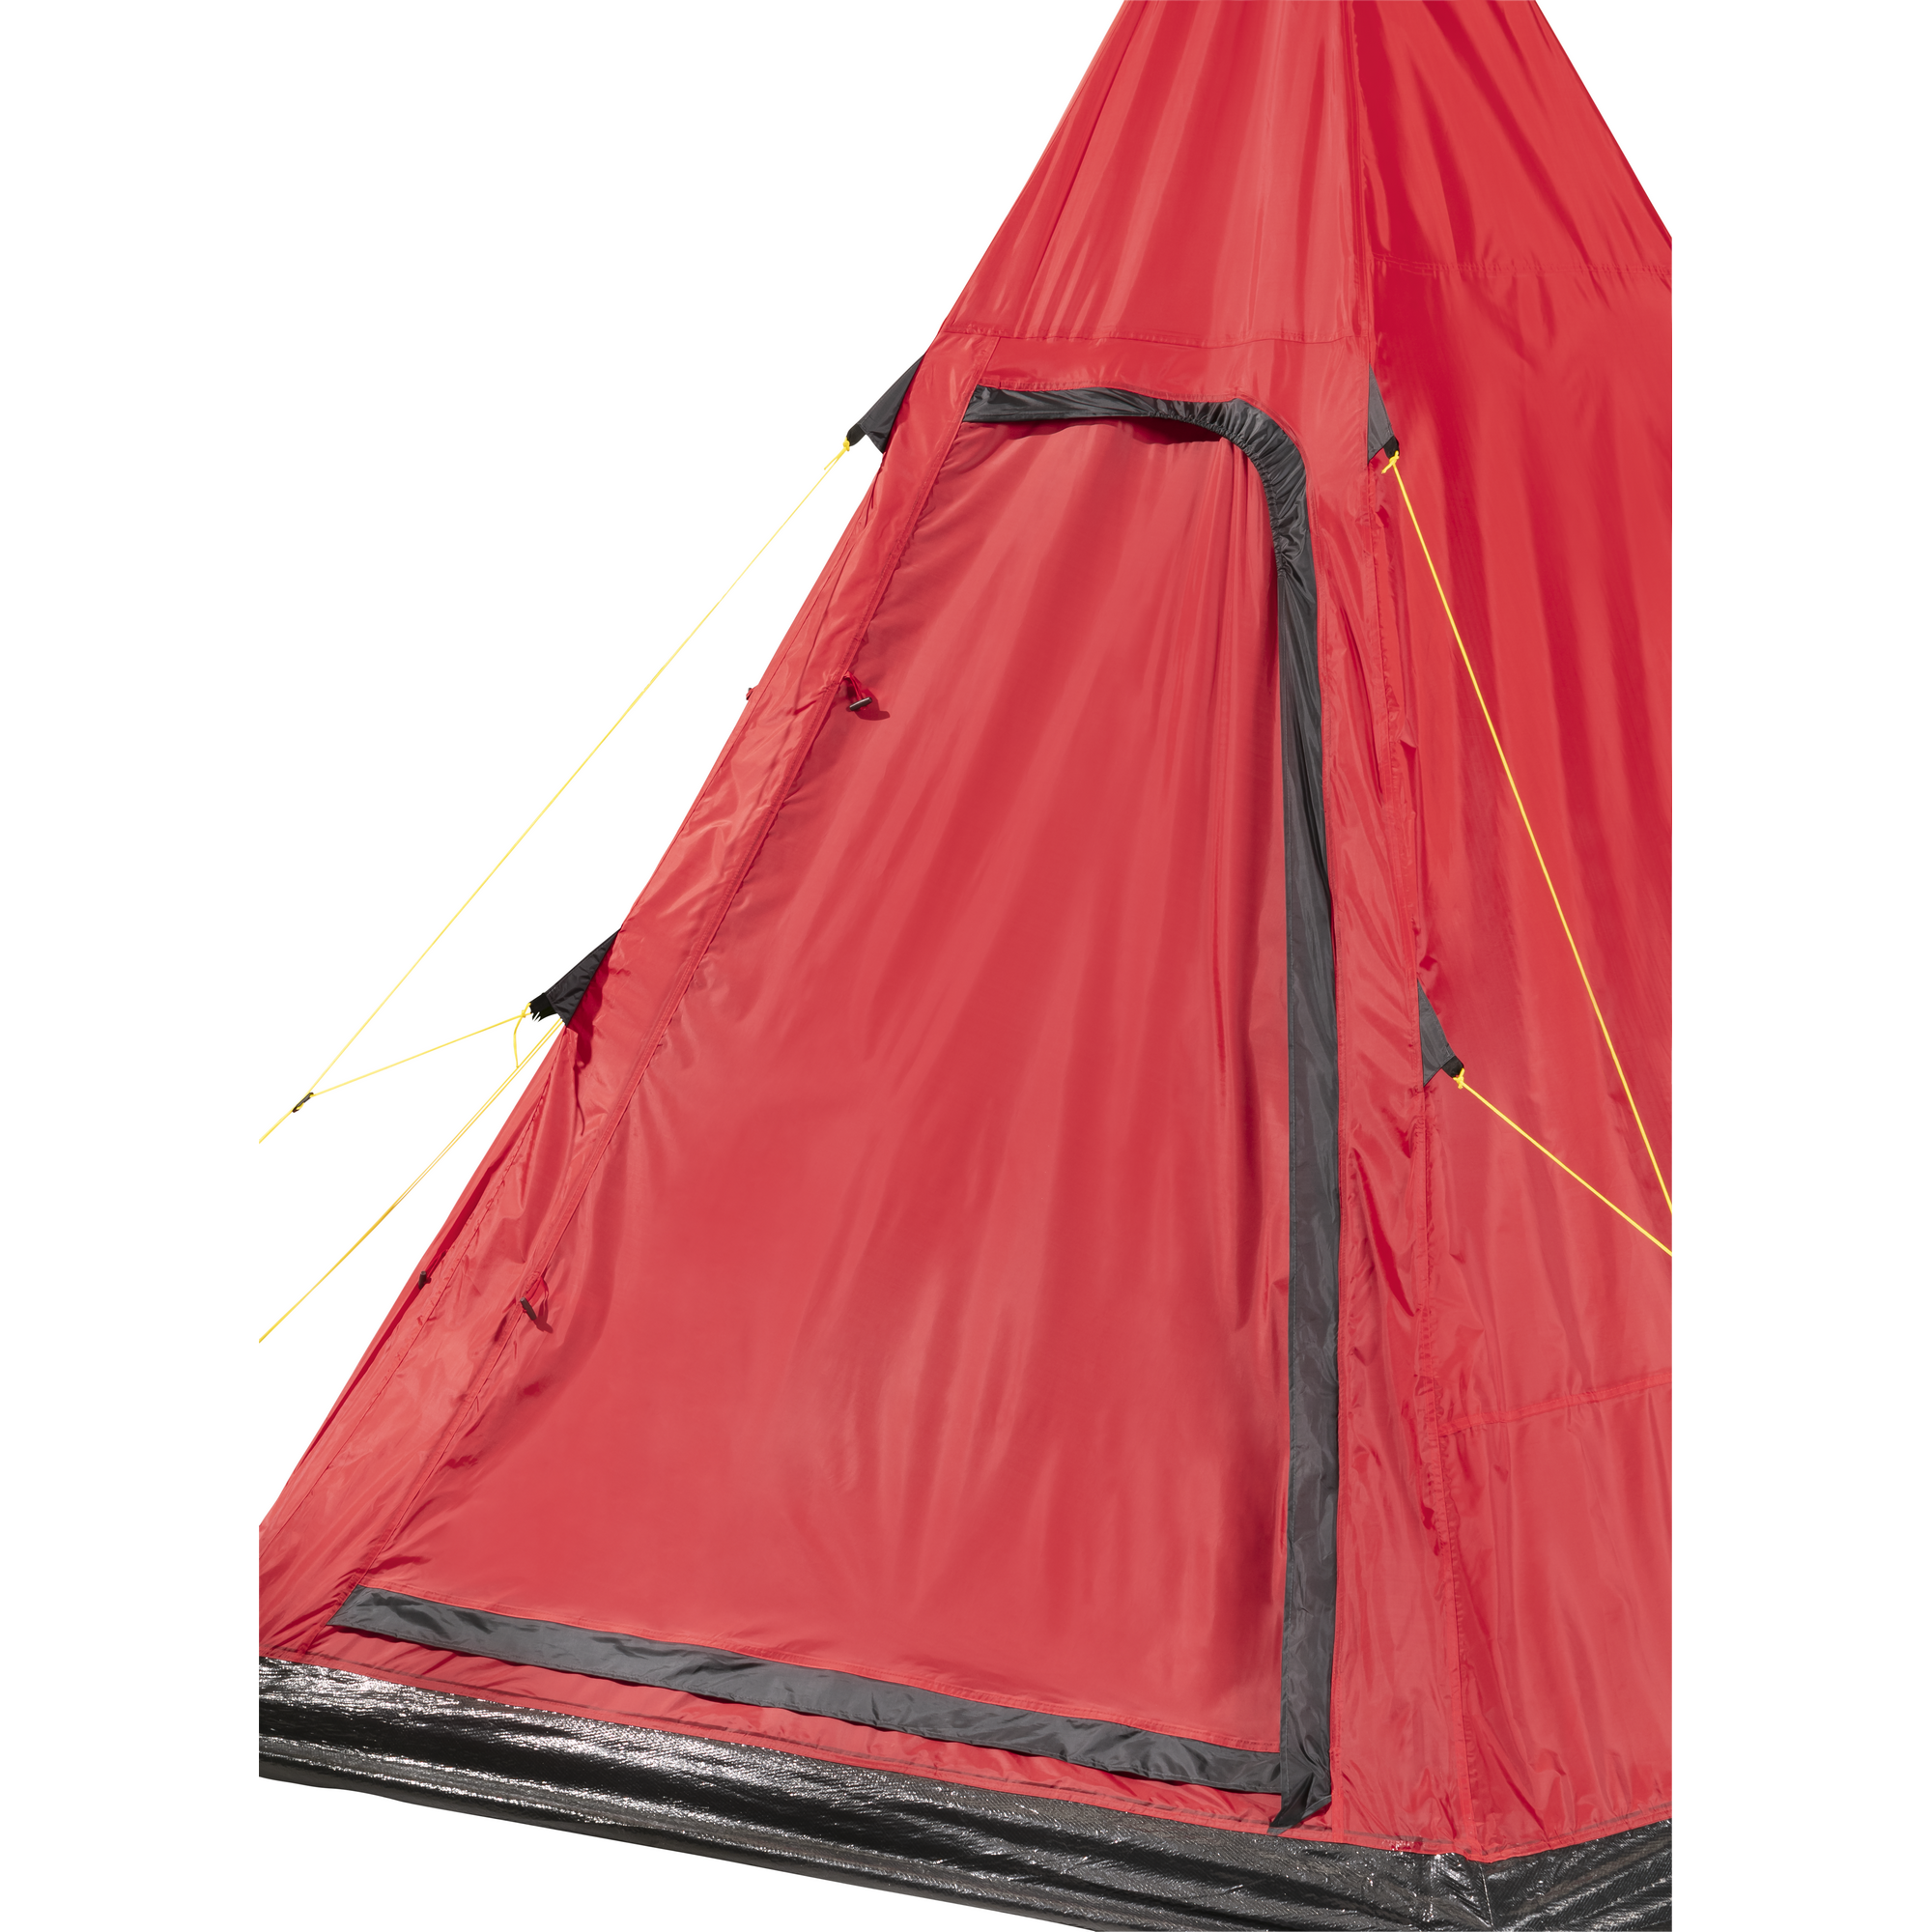 Tipi-Zelt 'Indira' rot 300 x 260 x 350 cm + product picture